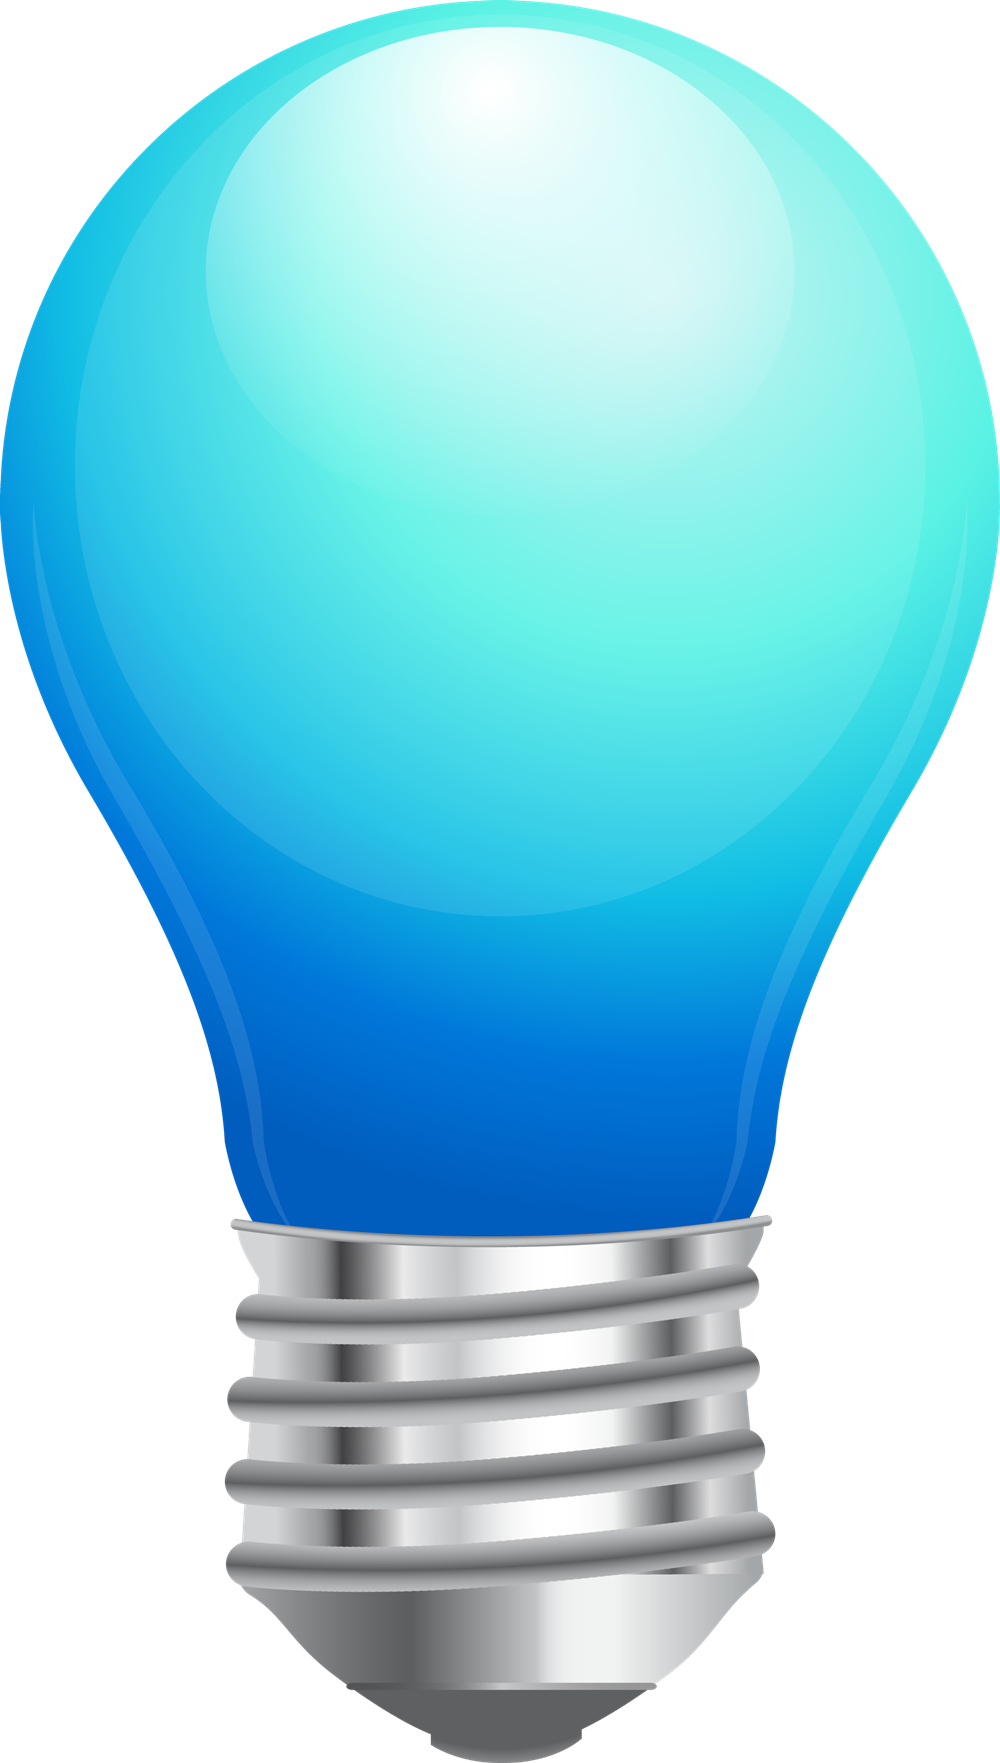 Light Bulb Image Clipart Free Download On Clipartmag